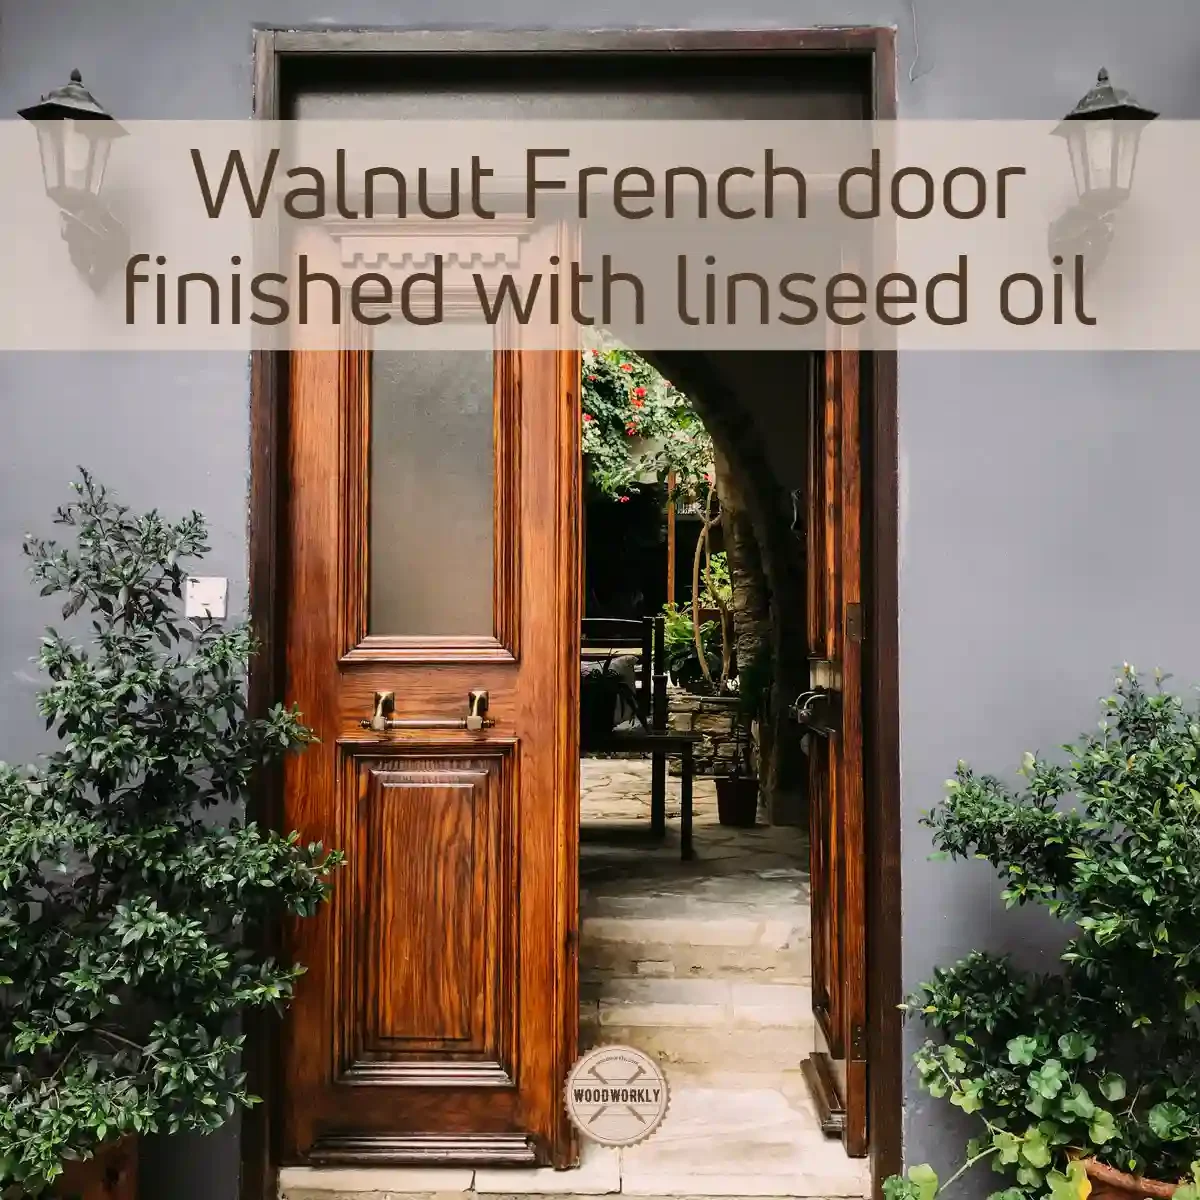 Walnut French door finished with linseed oil